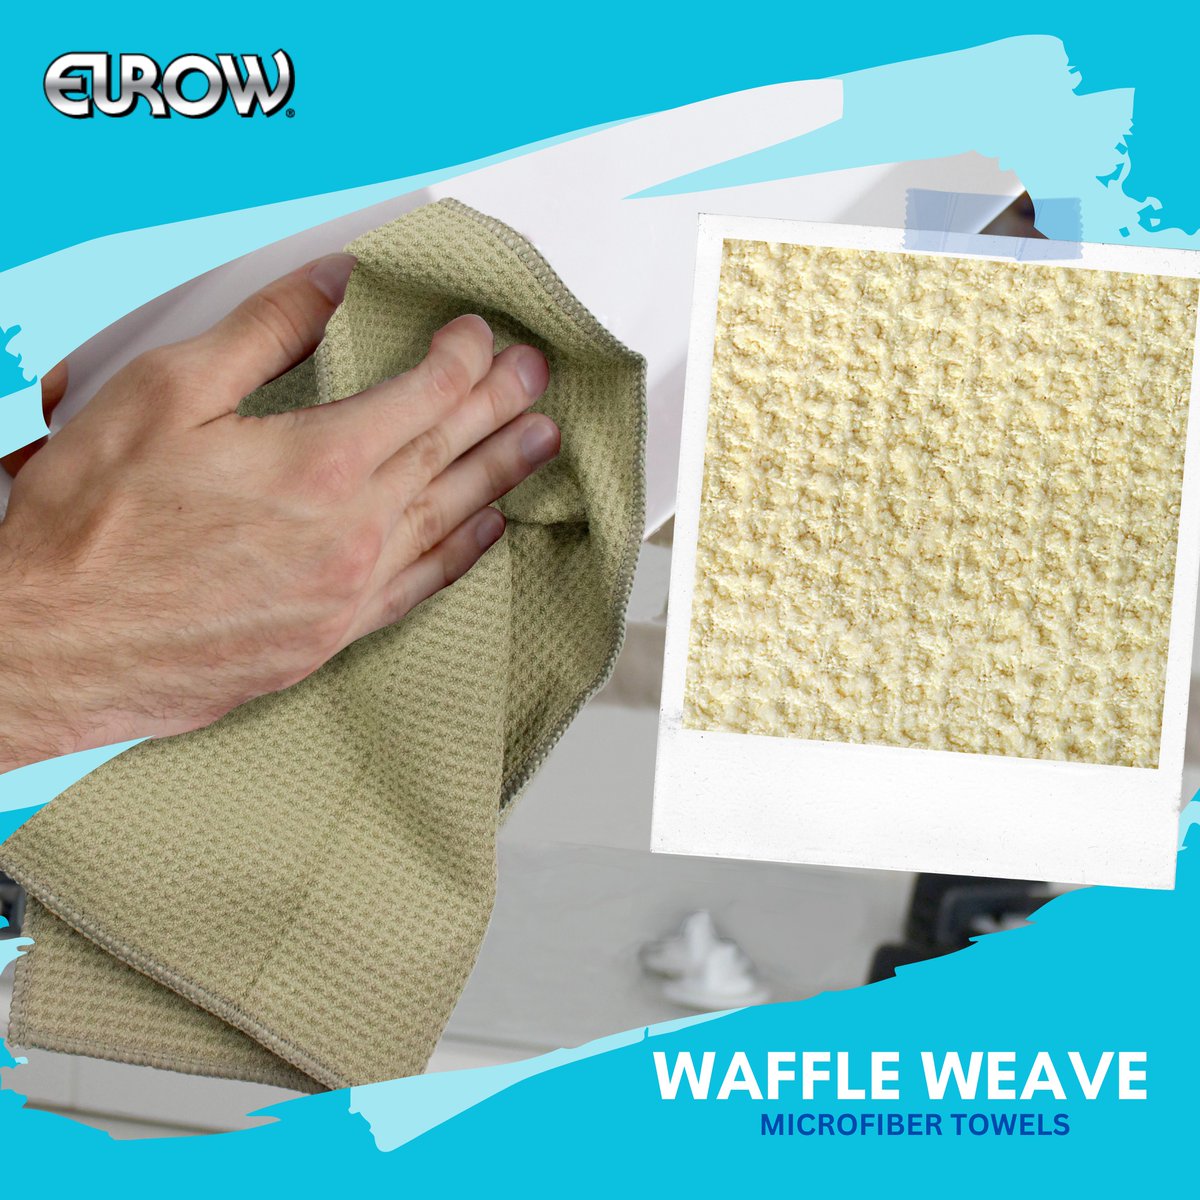 Read about the wow factor of Waffle weave #microfiber towels in our latest blogpost!
📑ow.ly/UzxB50QCfO2

#microfibercloths #microfibertowels #eurow #waffleweave #microfiberweave #waffleweavemicrofiber #cleaning #autodetailing #autodetail #autodetailers #besttowel #towels